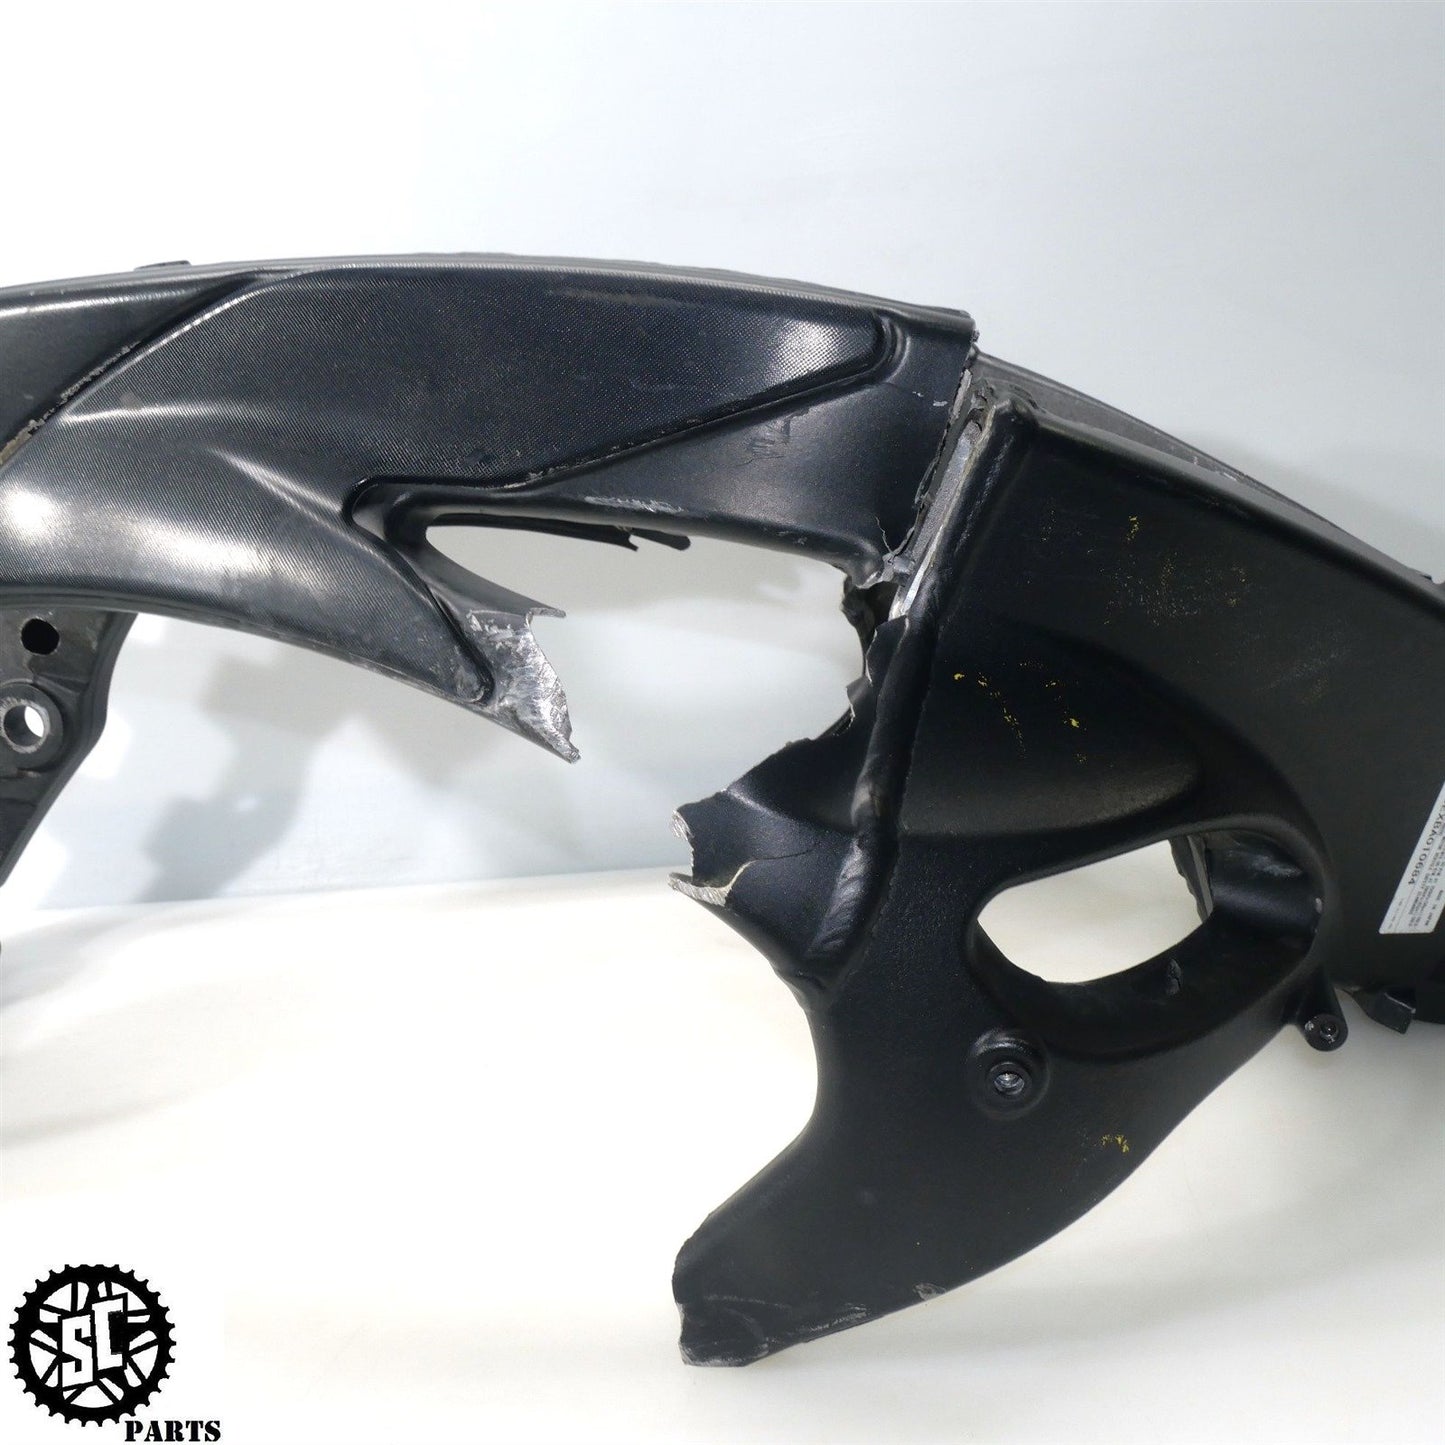 09-14 YAMAHA YZF R1 MAIN FRAME CHASSIS *S* Y39 2011